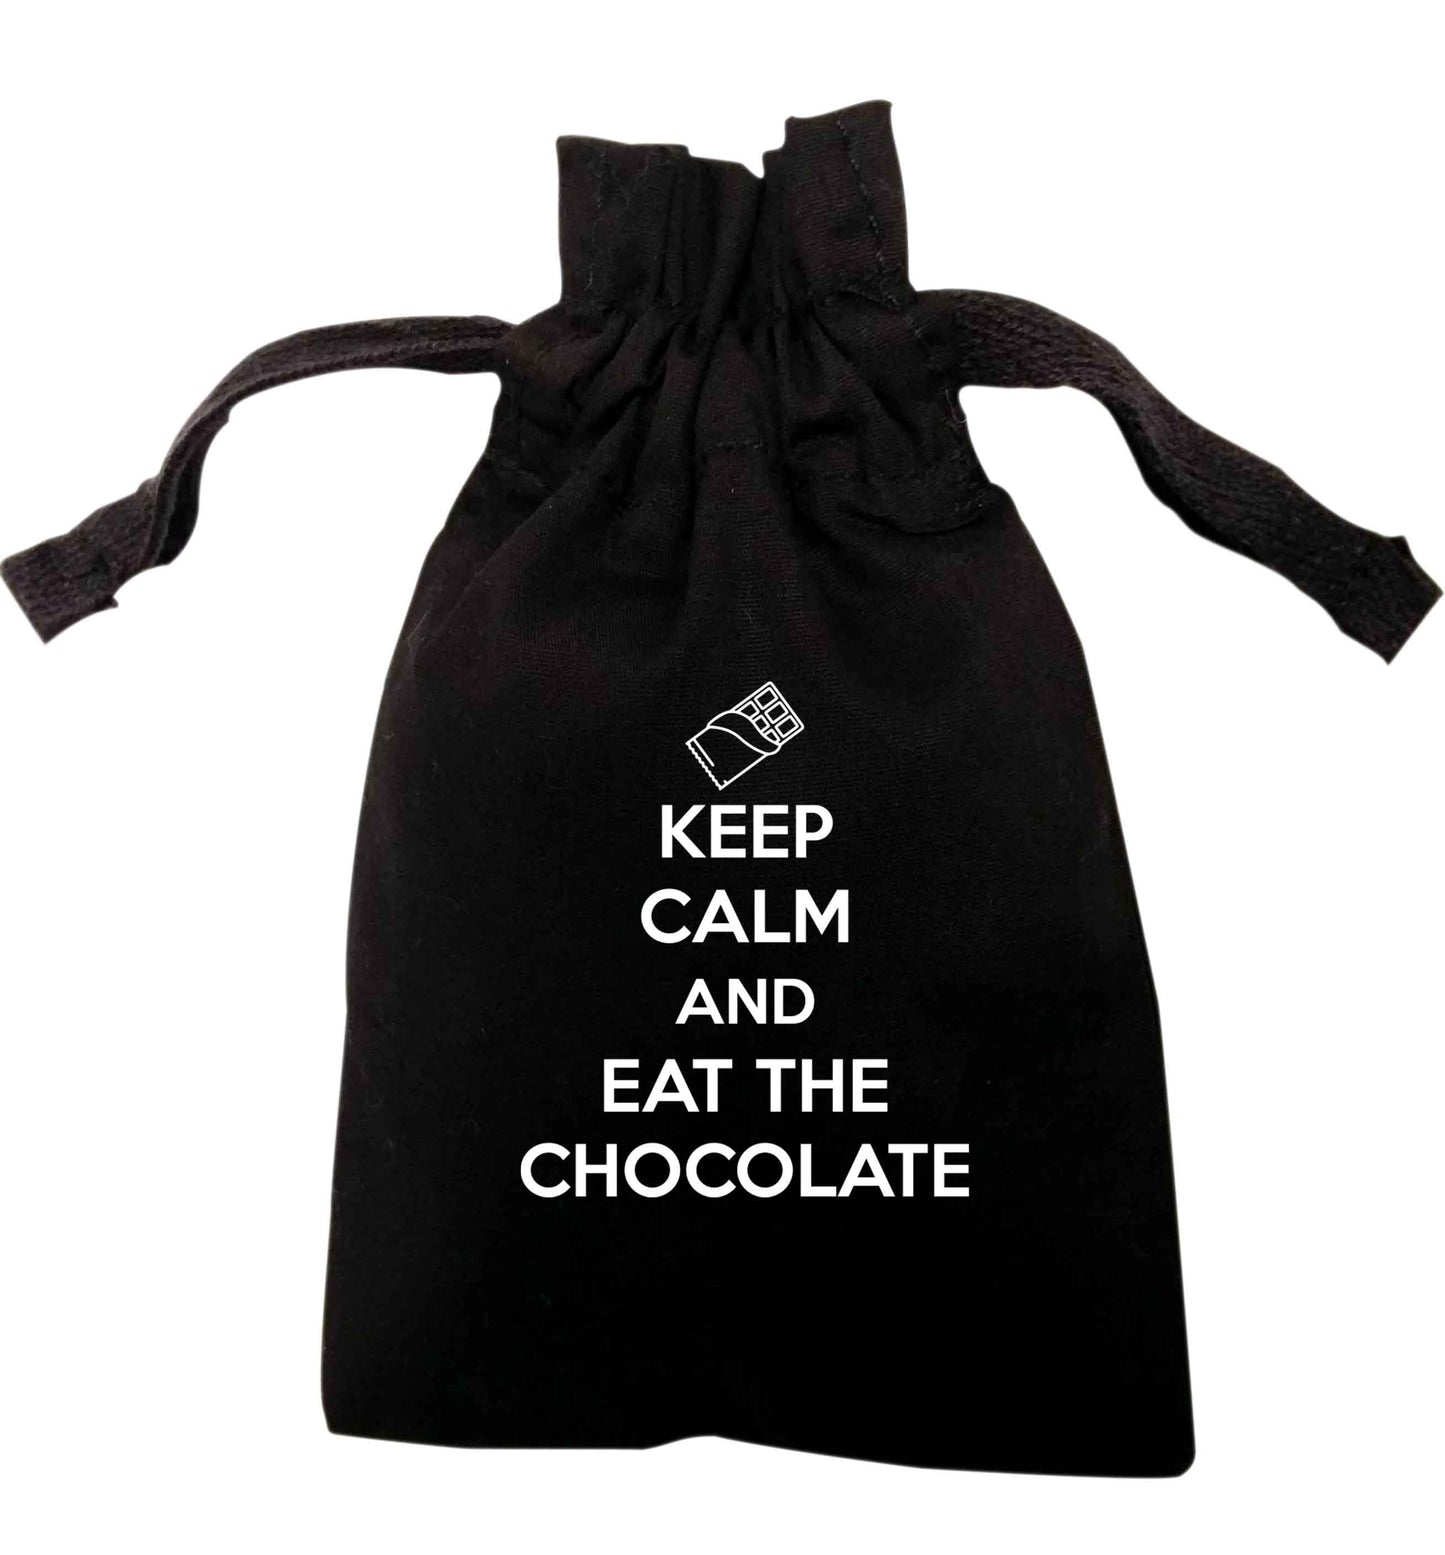 Keep calm and eat the chocolate | XS - L | Pouch / Drawstring bag / Sack | Organic Cotton | Bulk discounts available!